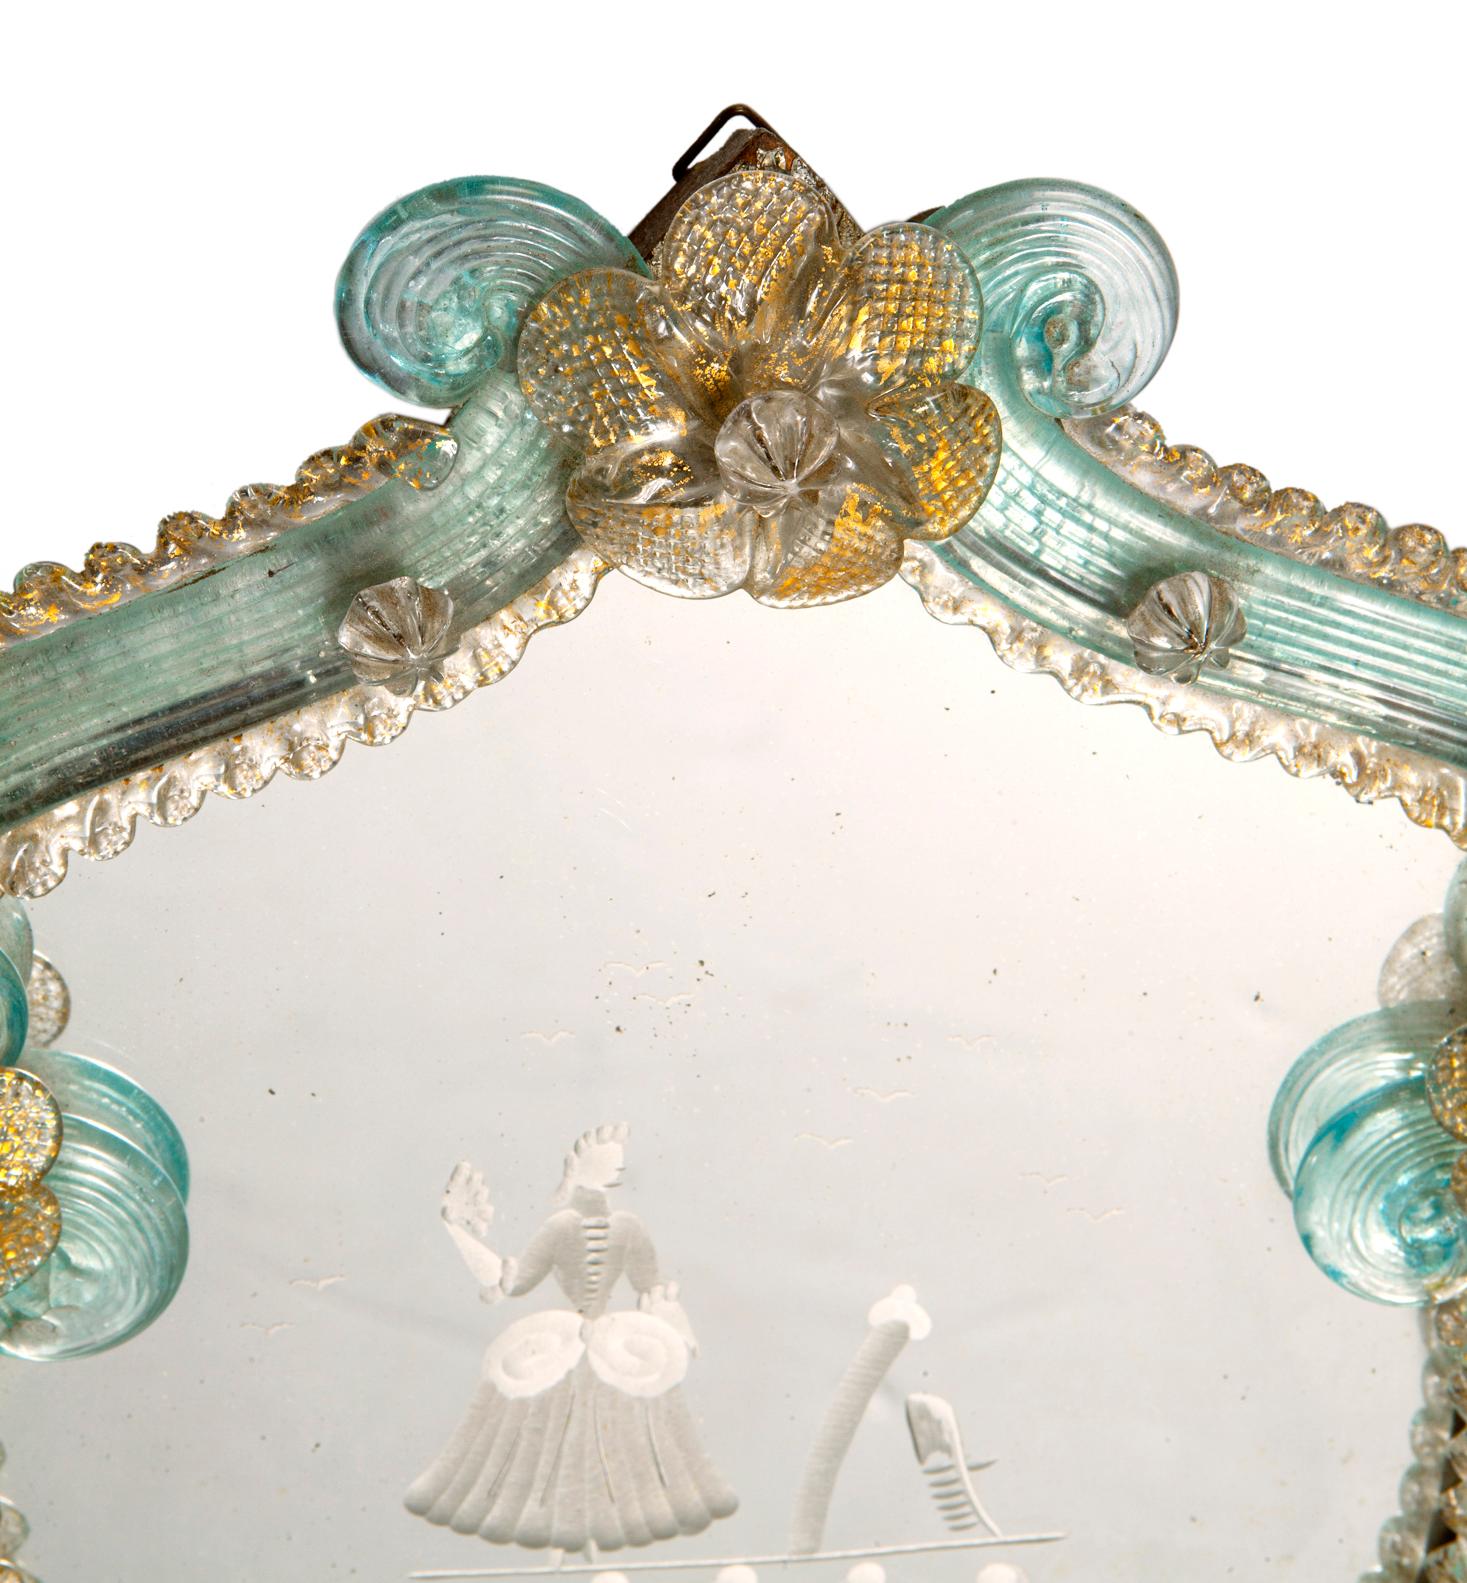 Venetian Etched & Blown Glass candle sconce. The mirrored glass back is etched with romantic costumed courtesan with trees & foliage.
There are gold flecks in the glass trimmed edge.
The hand blown glass frame is embellished with flowers & ruffles